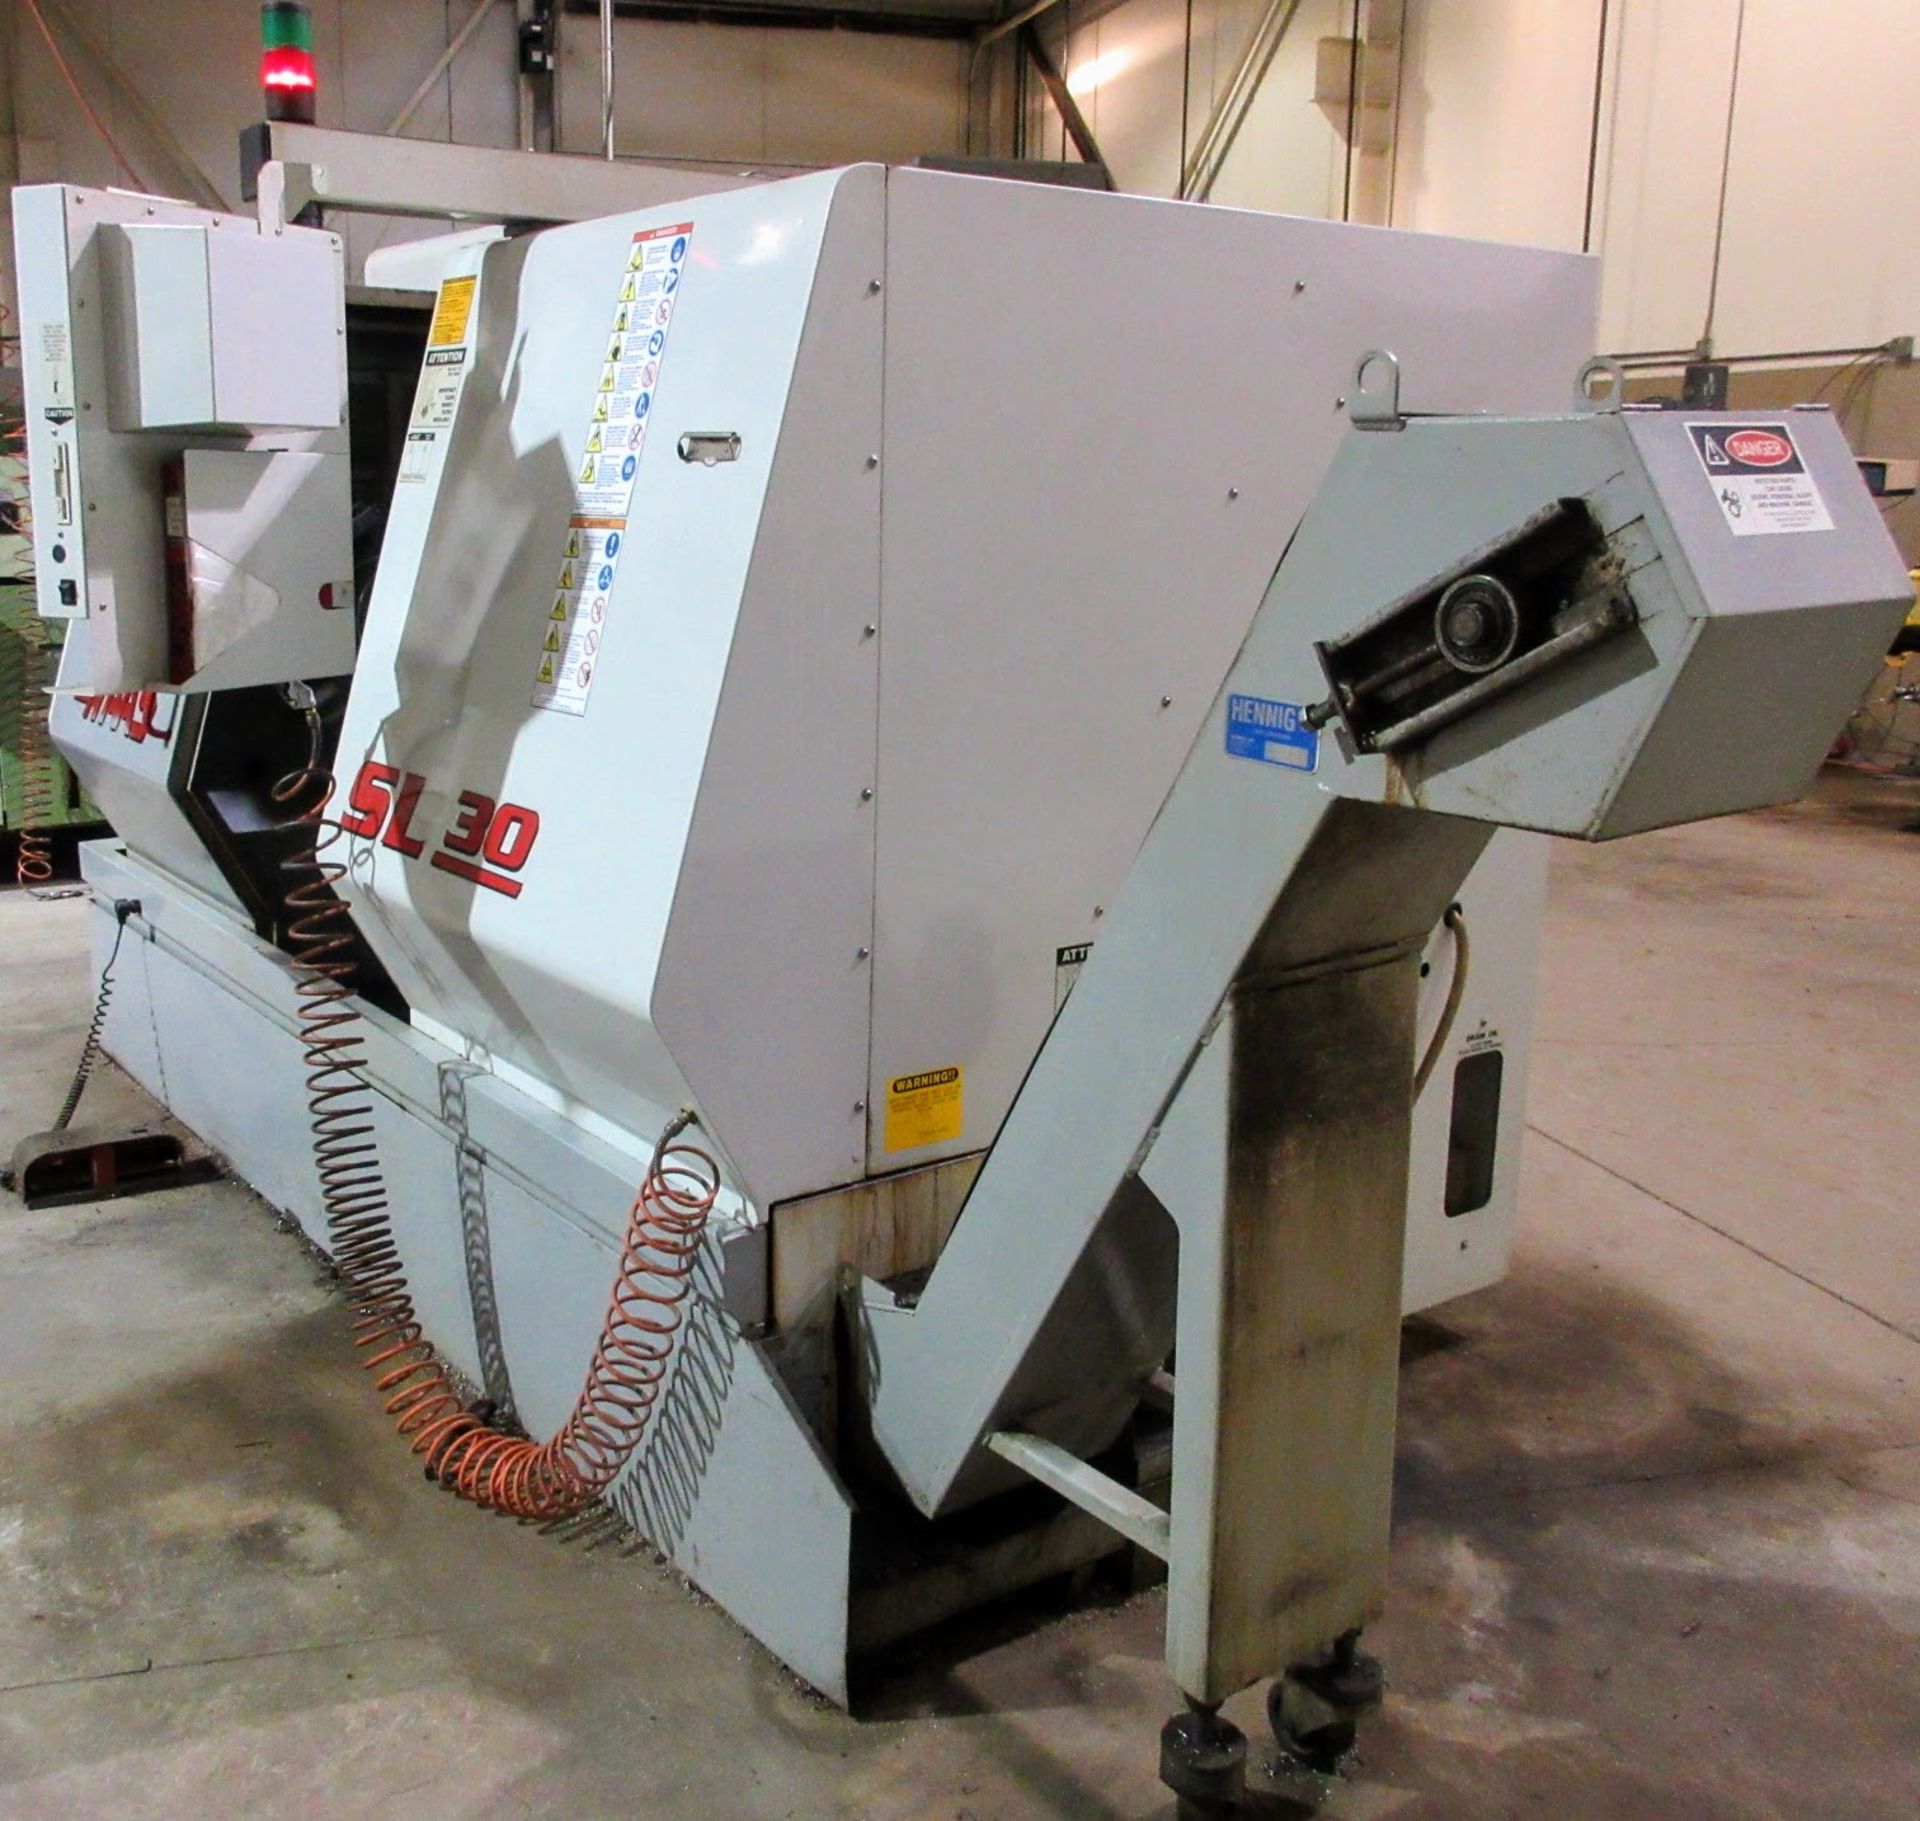 2000 HAAS SL-30T CNC LATHE, S/N 62806, CNC CONTROL, 10” 3-JAW CHUCK, TOOL PRESETTER, 12-STATION - Image 17 of 23